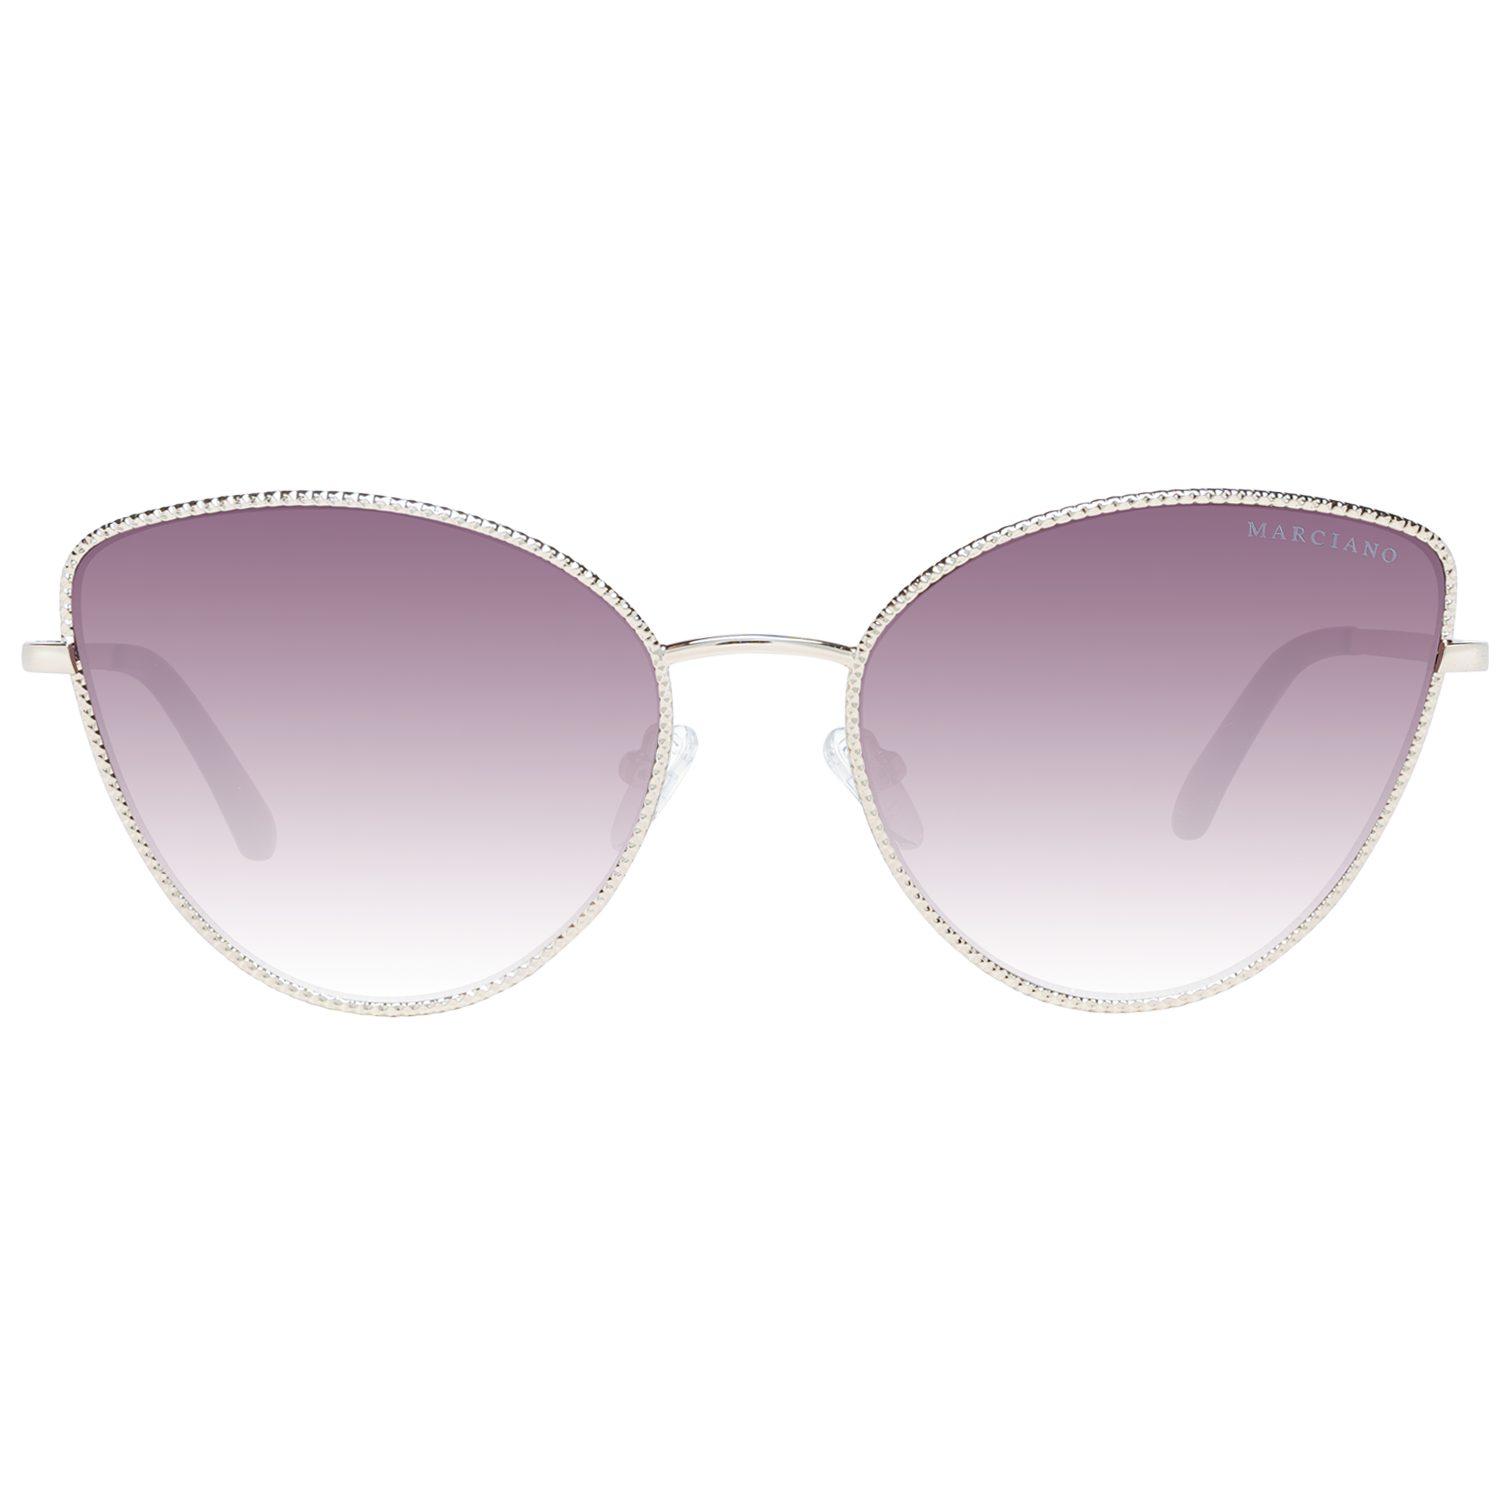 Marciano Guess by Sonnenbrille